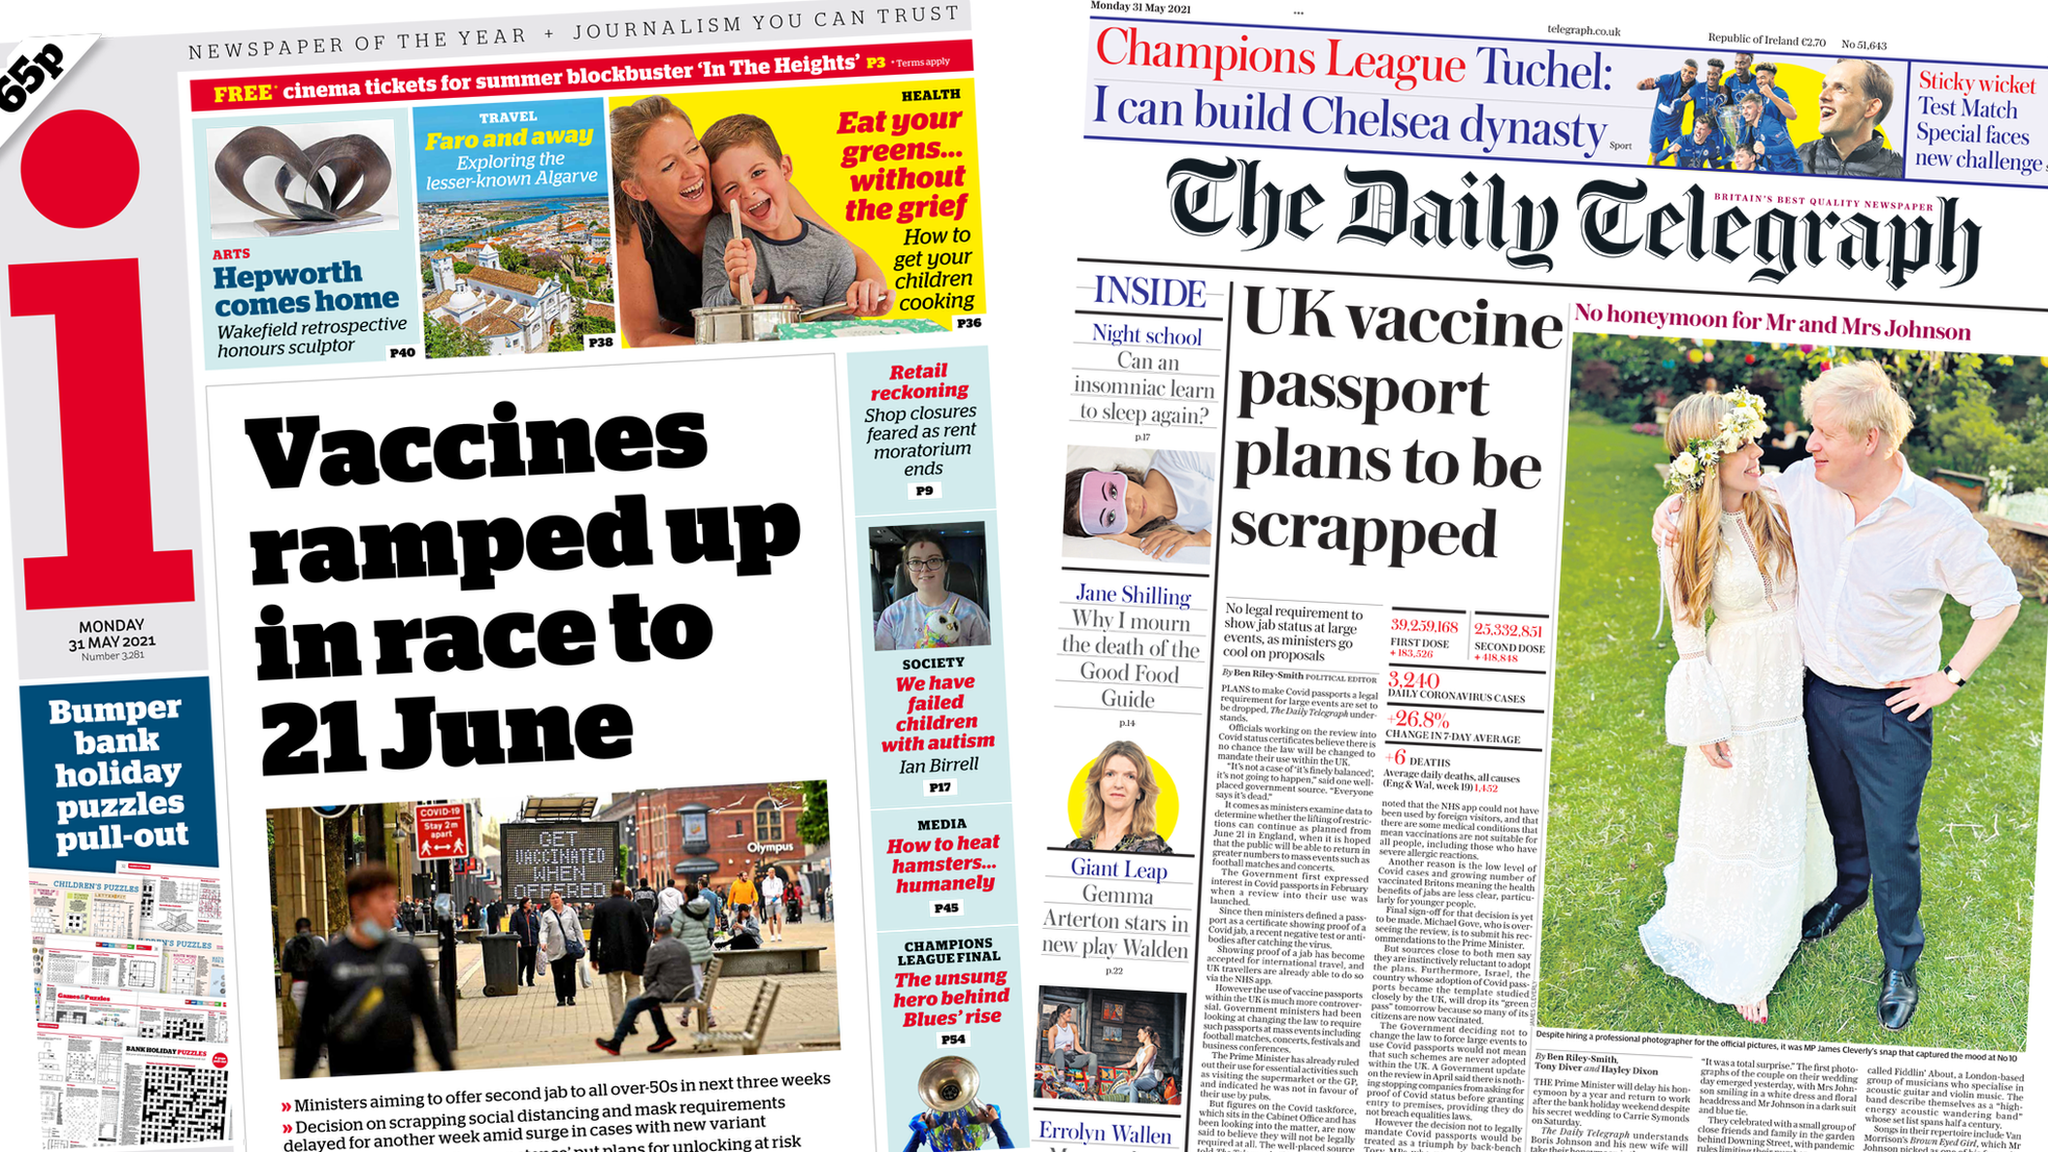 Newspaper Headlines Jabs Ramped Up And Covid Passport Scrapped c News